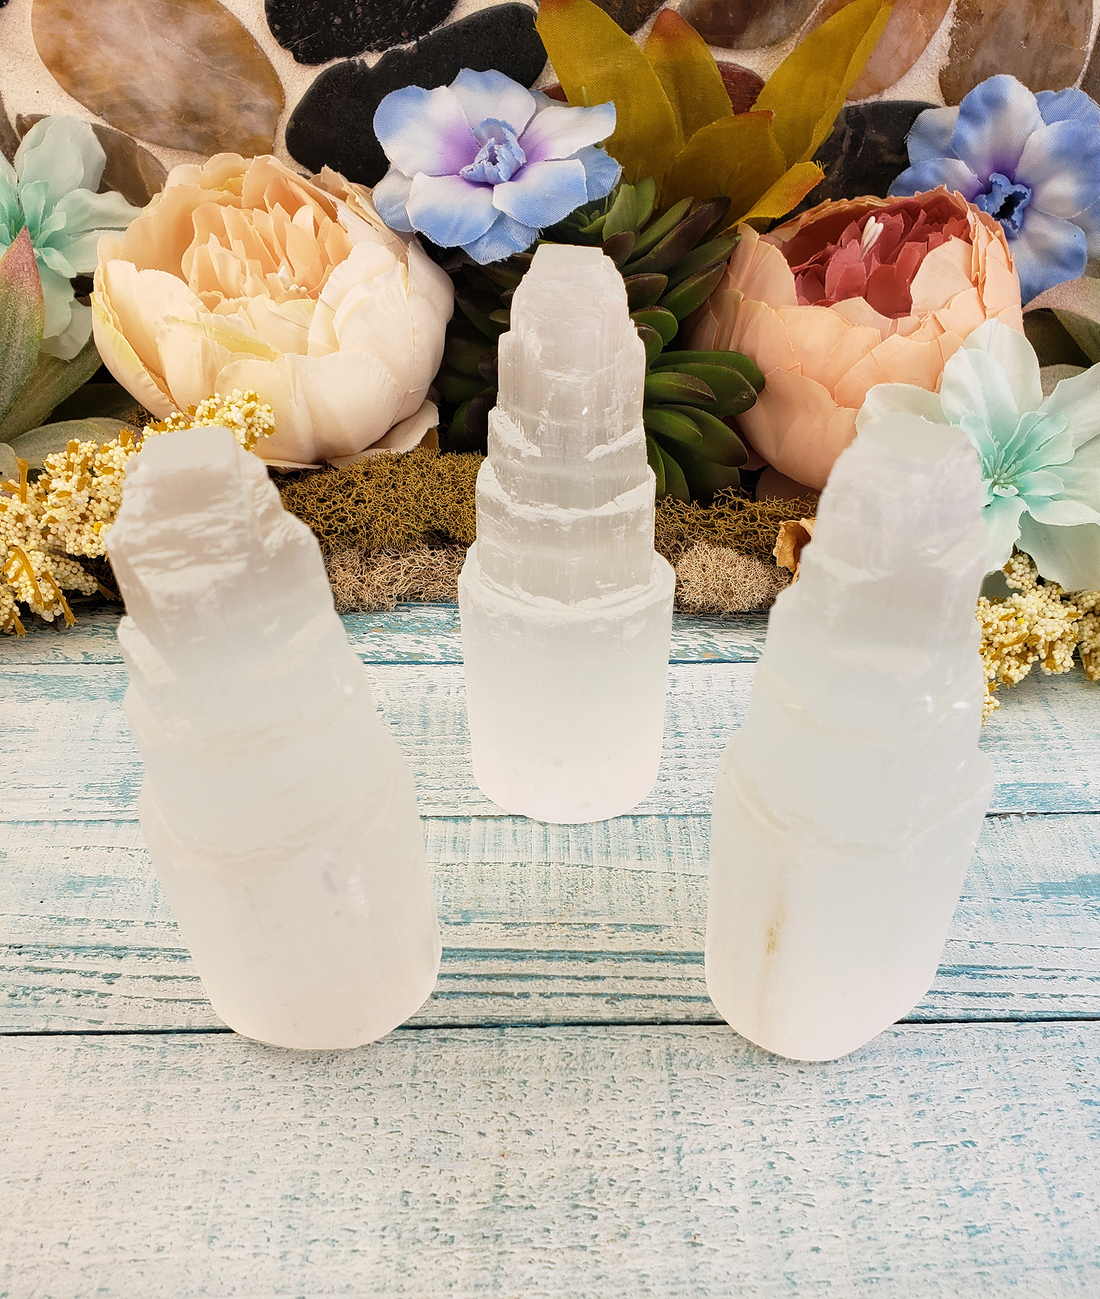 Selenite Gemstone Tower for Cleansing and Charging - Small - Natural Crystal - Satin Spar Gypsum